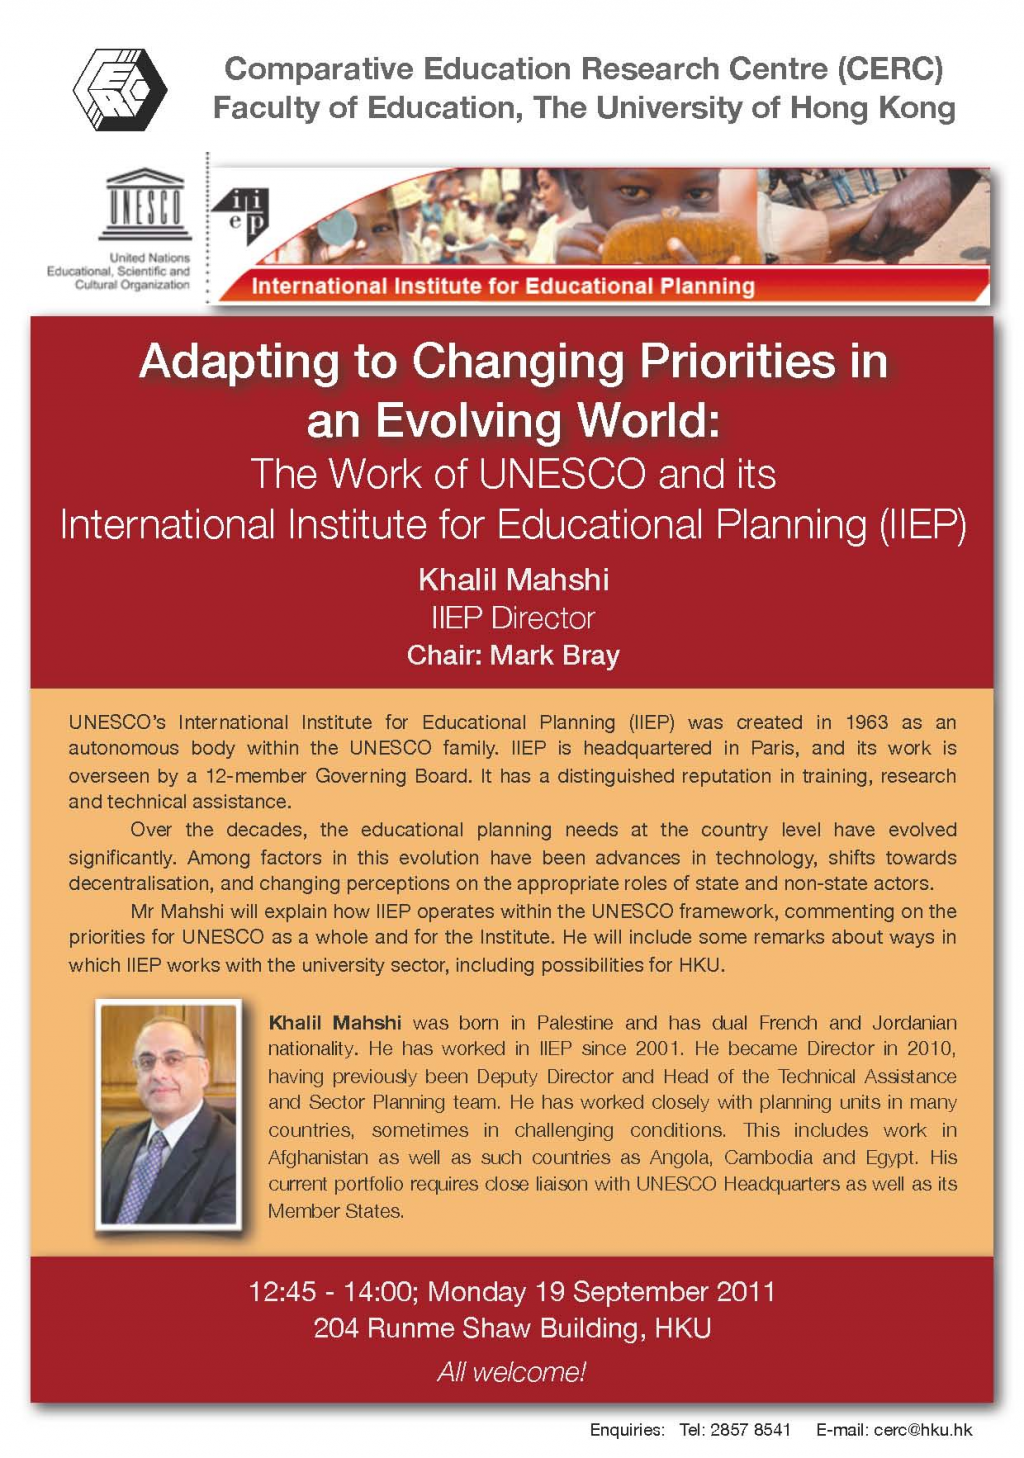 The Work of UNESCO and its International Institue for Educational Planning (IIEP)